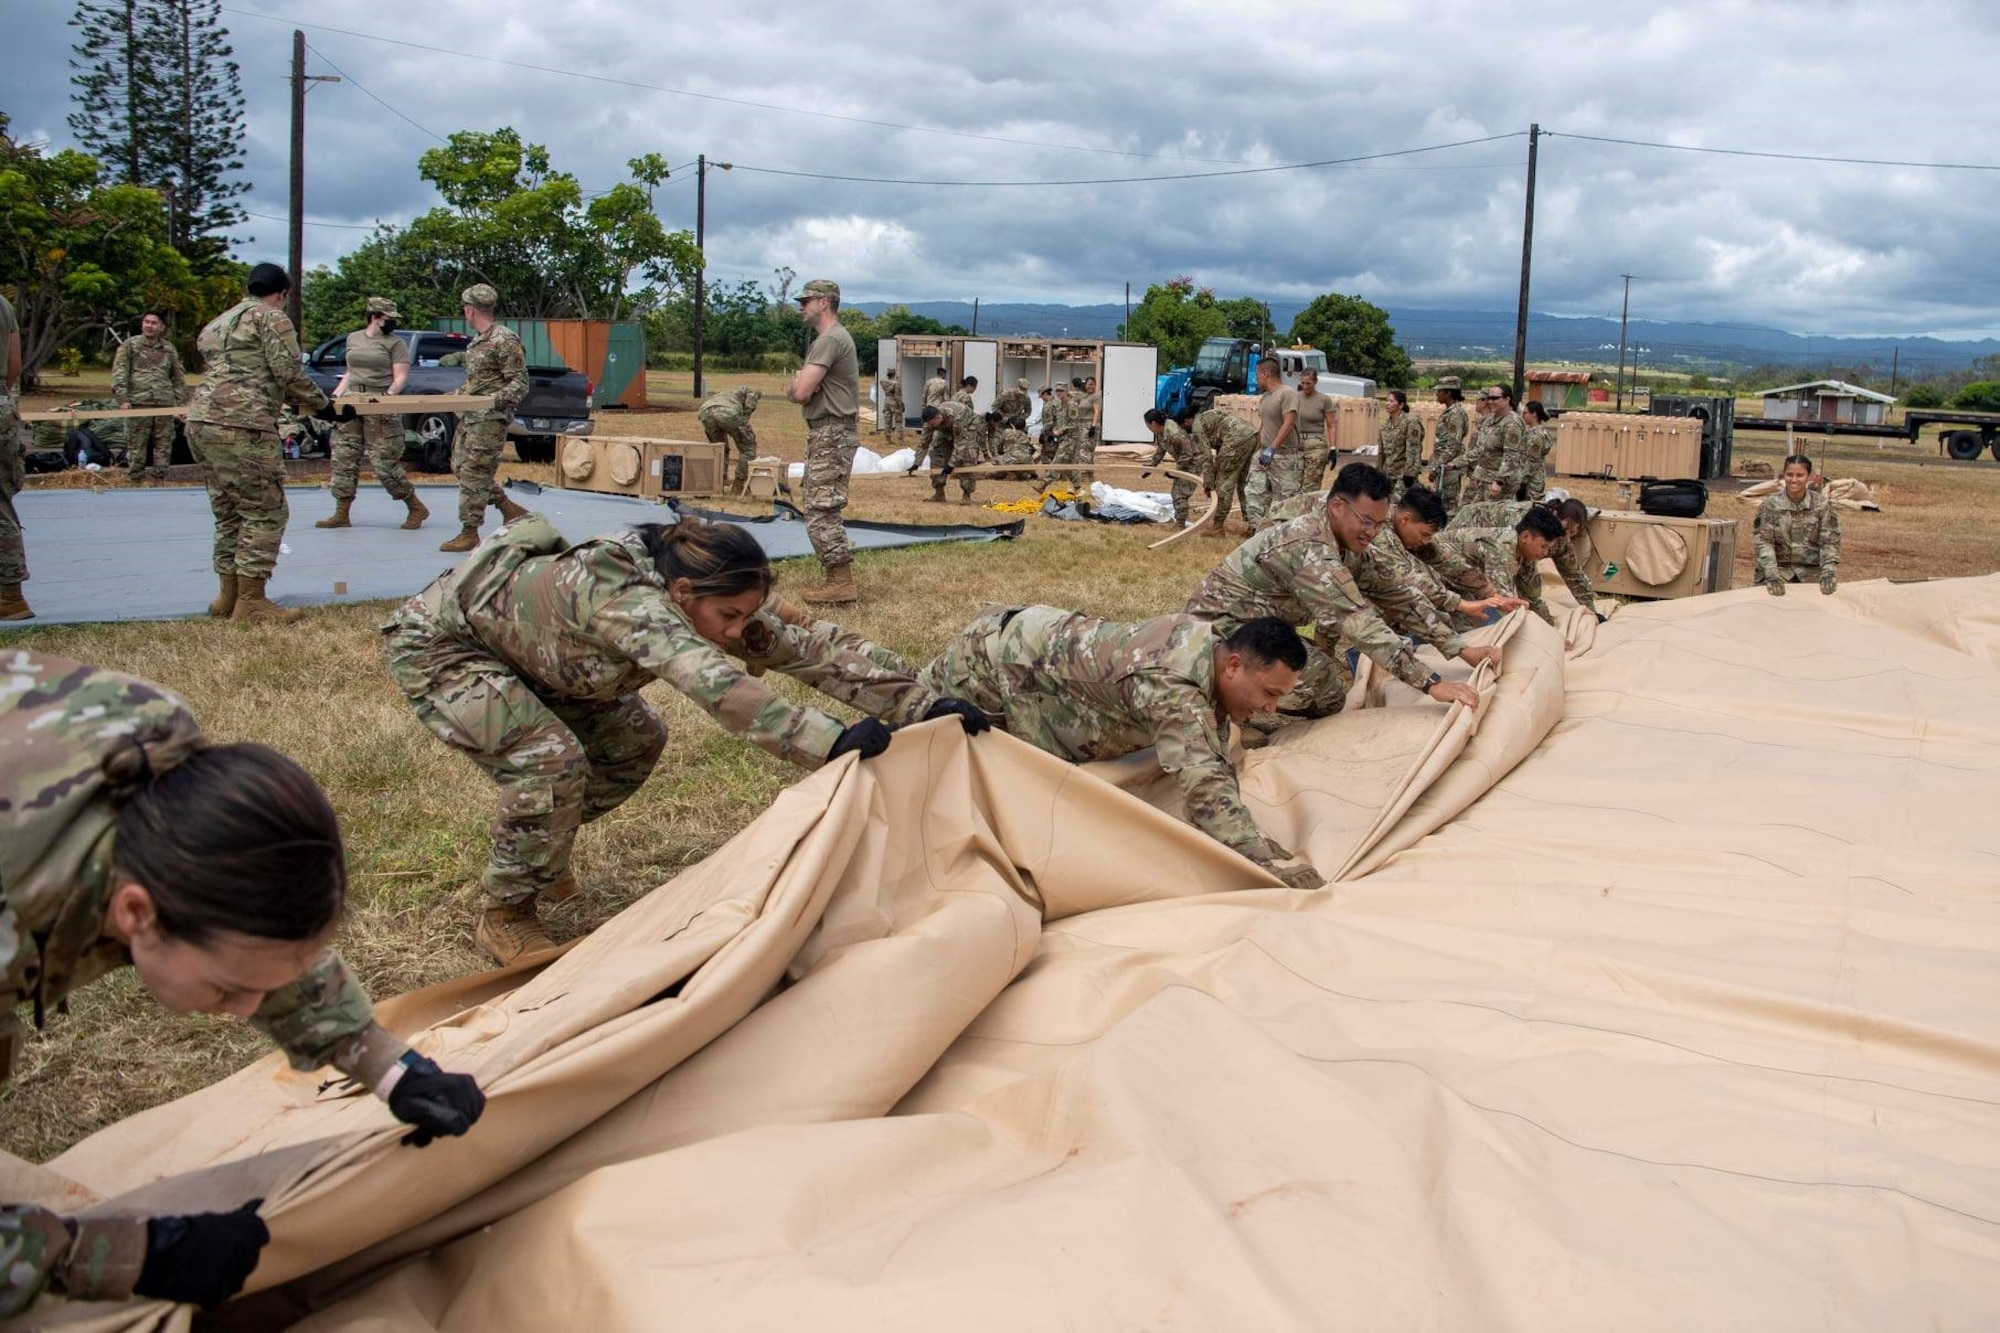 624th Regional Support Group Reserve Citizen Airmen break down Triple S construction tents after a Total Force Integration (TFI) exercise at Schofield Barracks, Hawaii. TFI is a blend of active, Guard, and Reserve personnel working together to accomplish the mission.